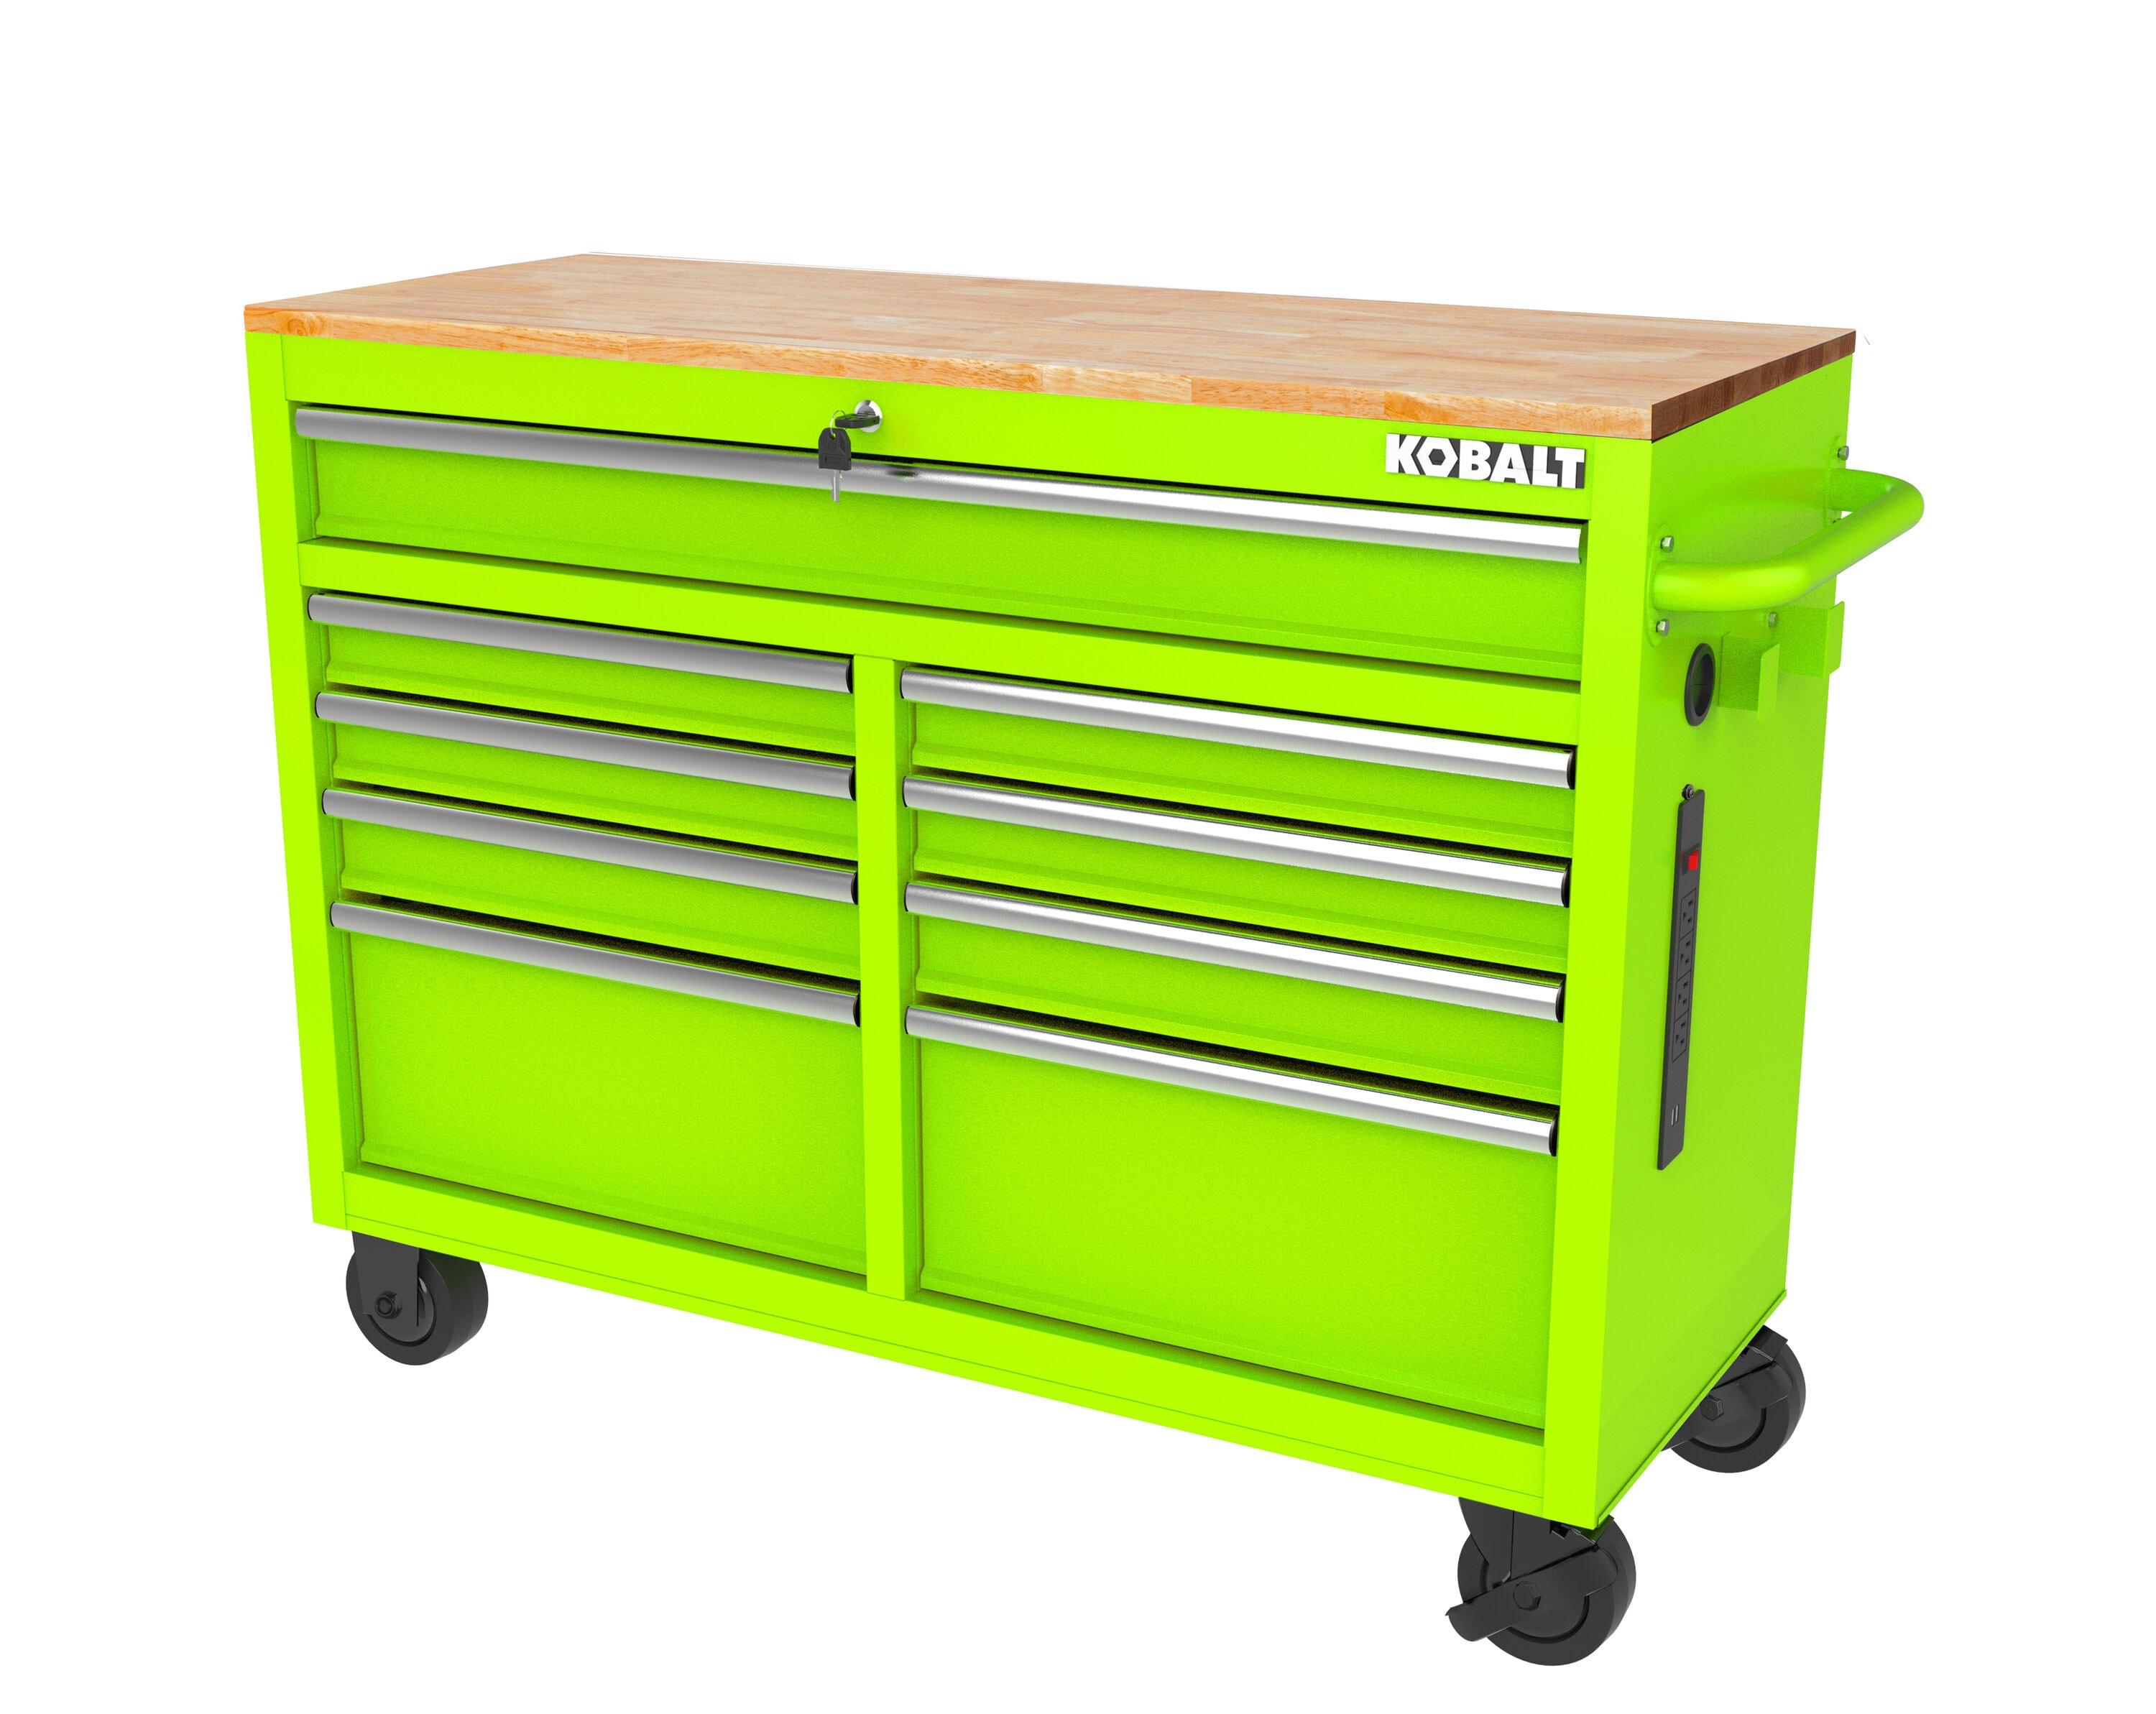 Kobalt 46.1-in L x 37.2-in H 9-Drawers Rolling Green Wood Work Bench